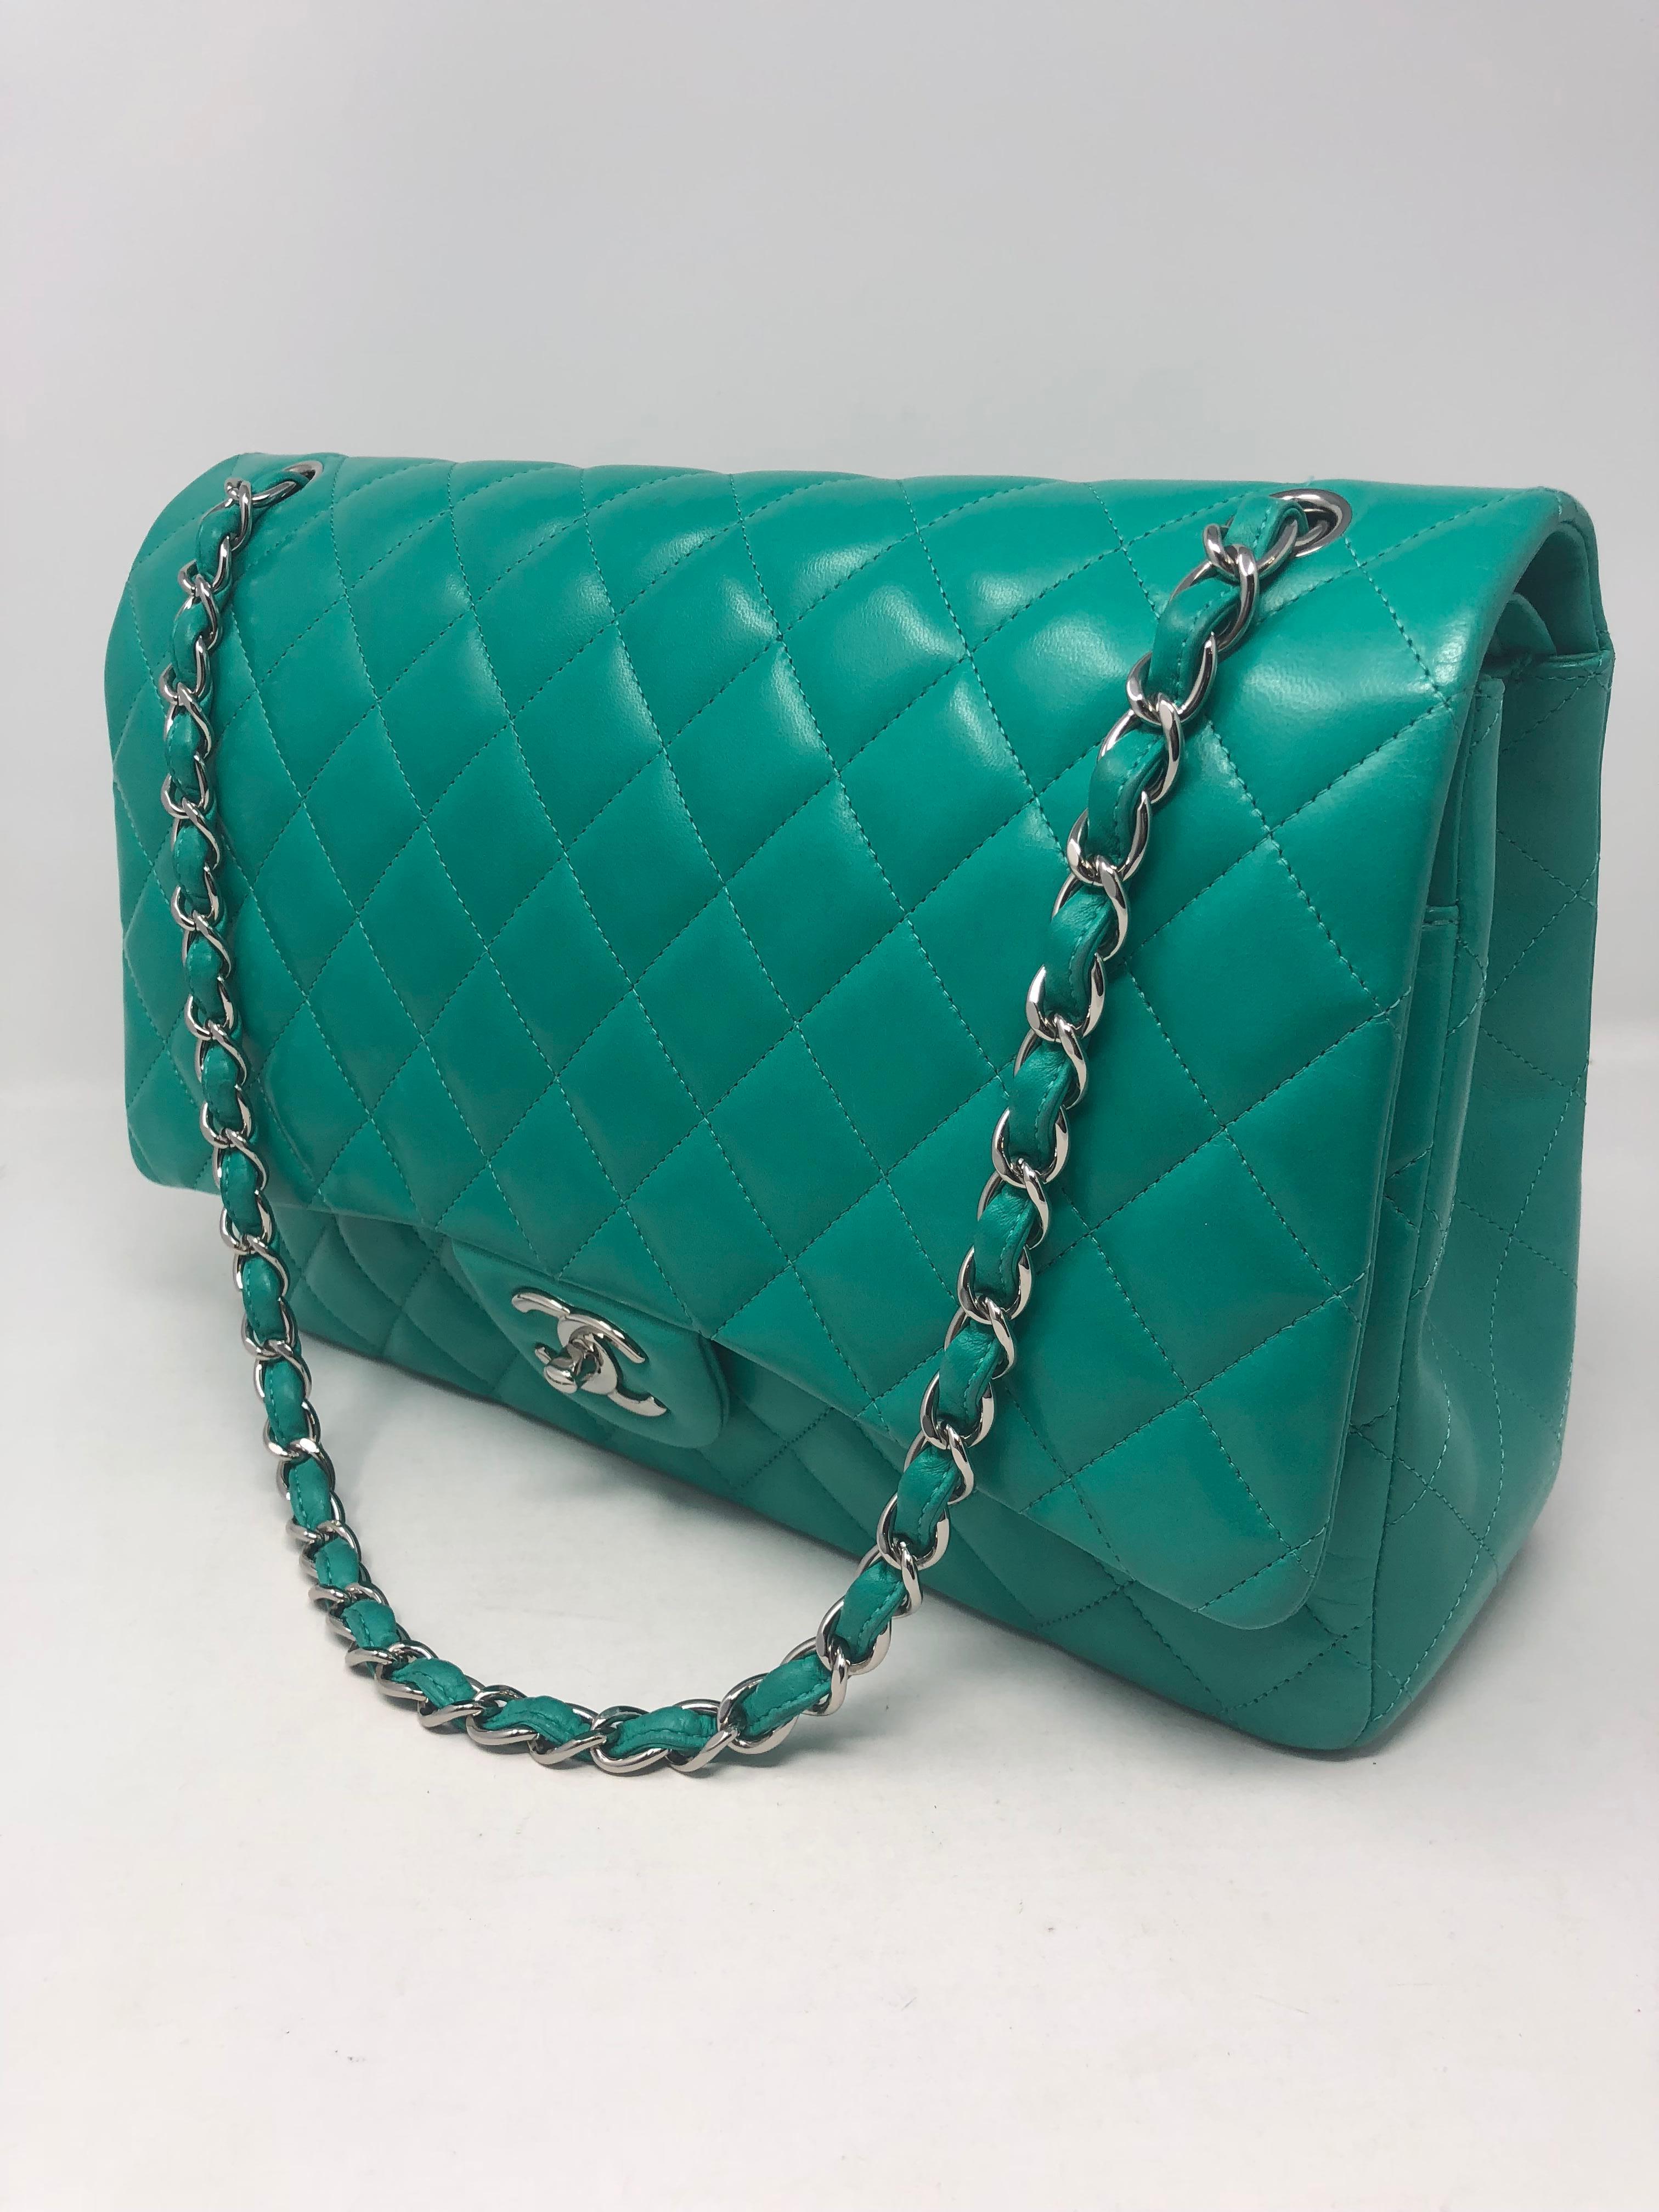 Chanel Menthe Green Leather Maxi Bag  4